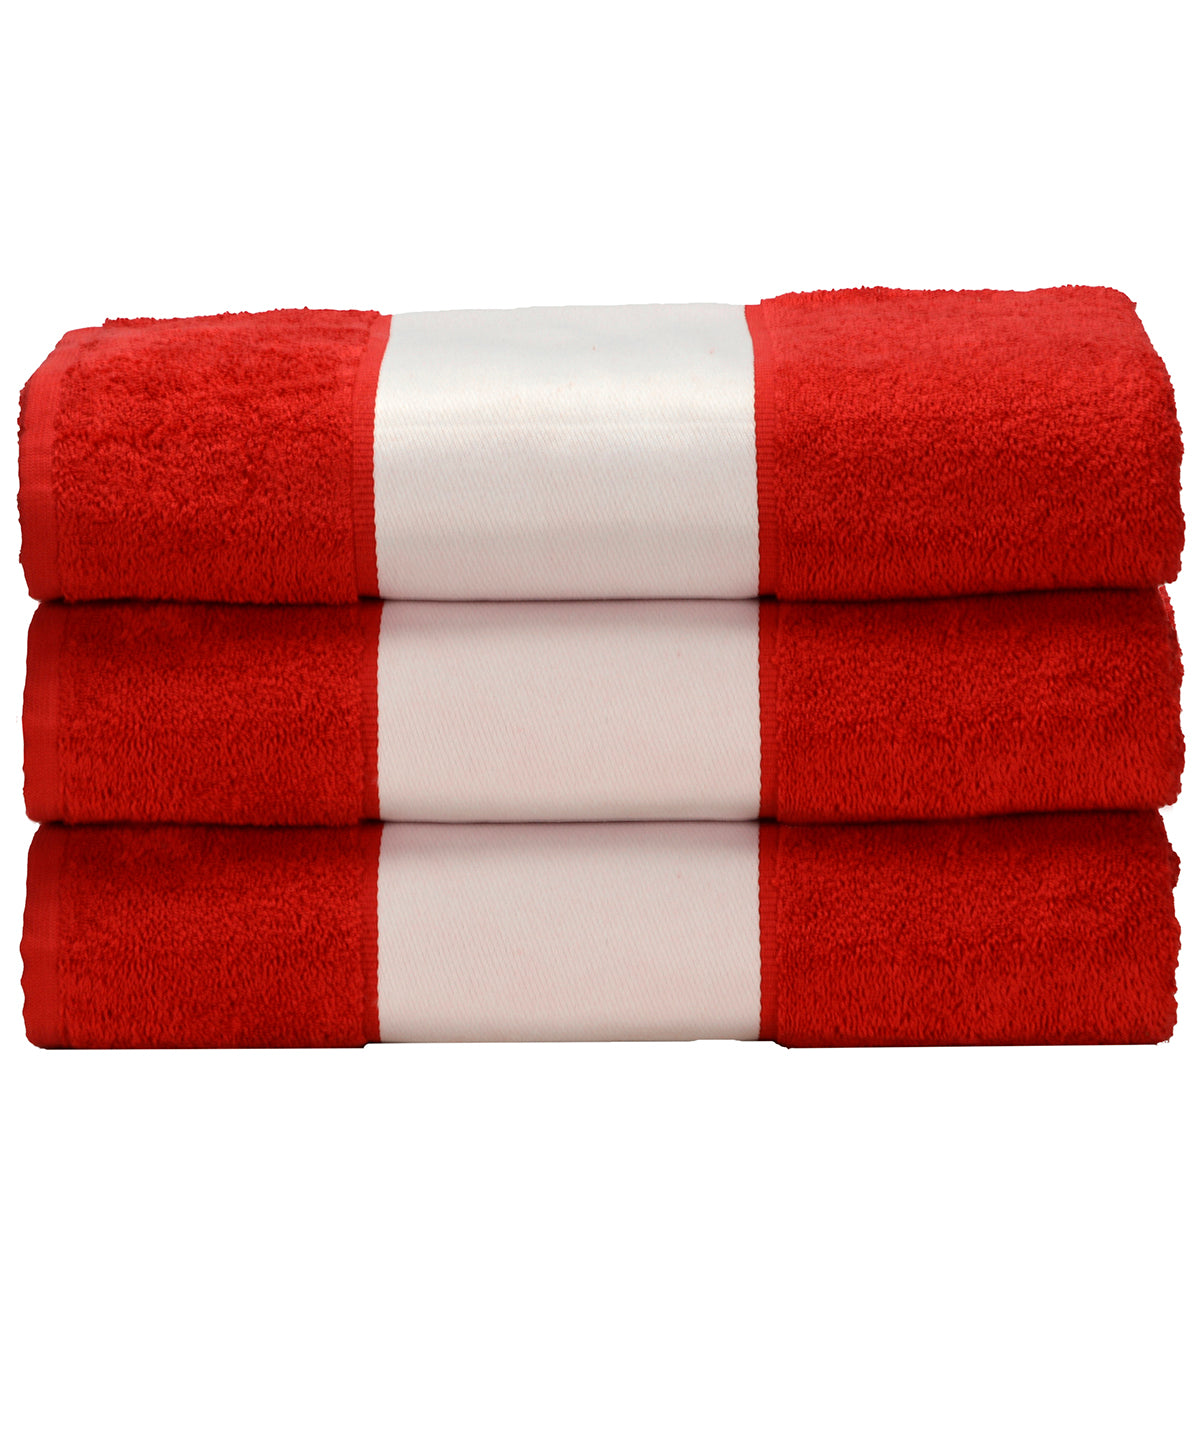 Personalised Towels - Mid Red A&R Towels ARTG® SUBLI-Me® hand towel